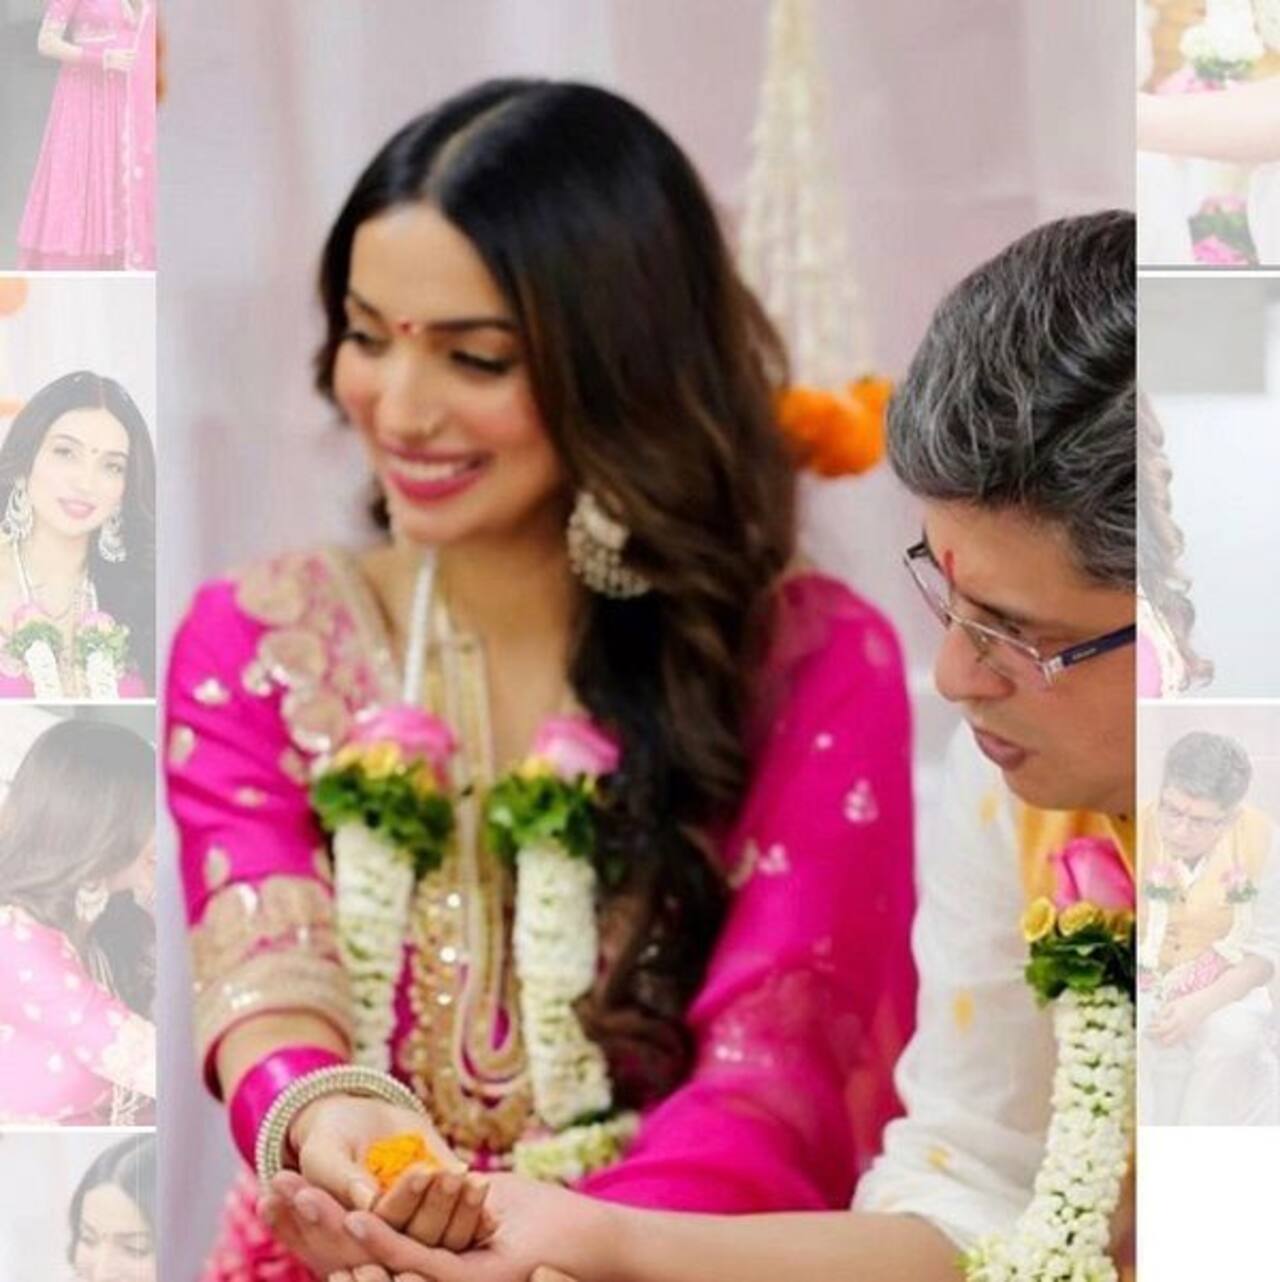 Swara Bhaskar’s ex-boyfriend, Himanshu Sharma ties the knot with Manmarziyaan writer Kanika Dhillon in a private ceremony, Taapsee Pannu blesses the couple